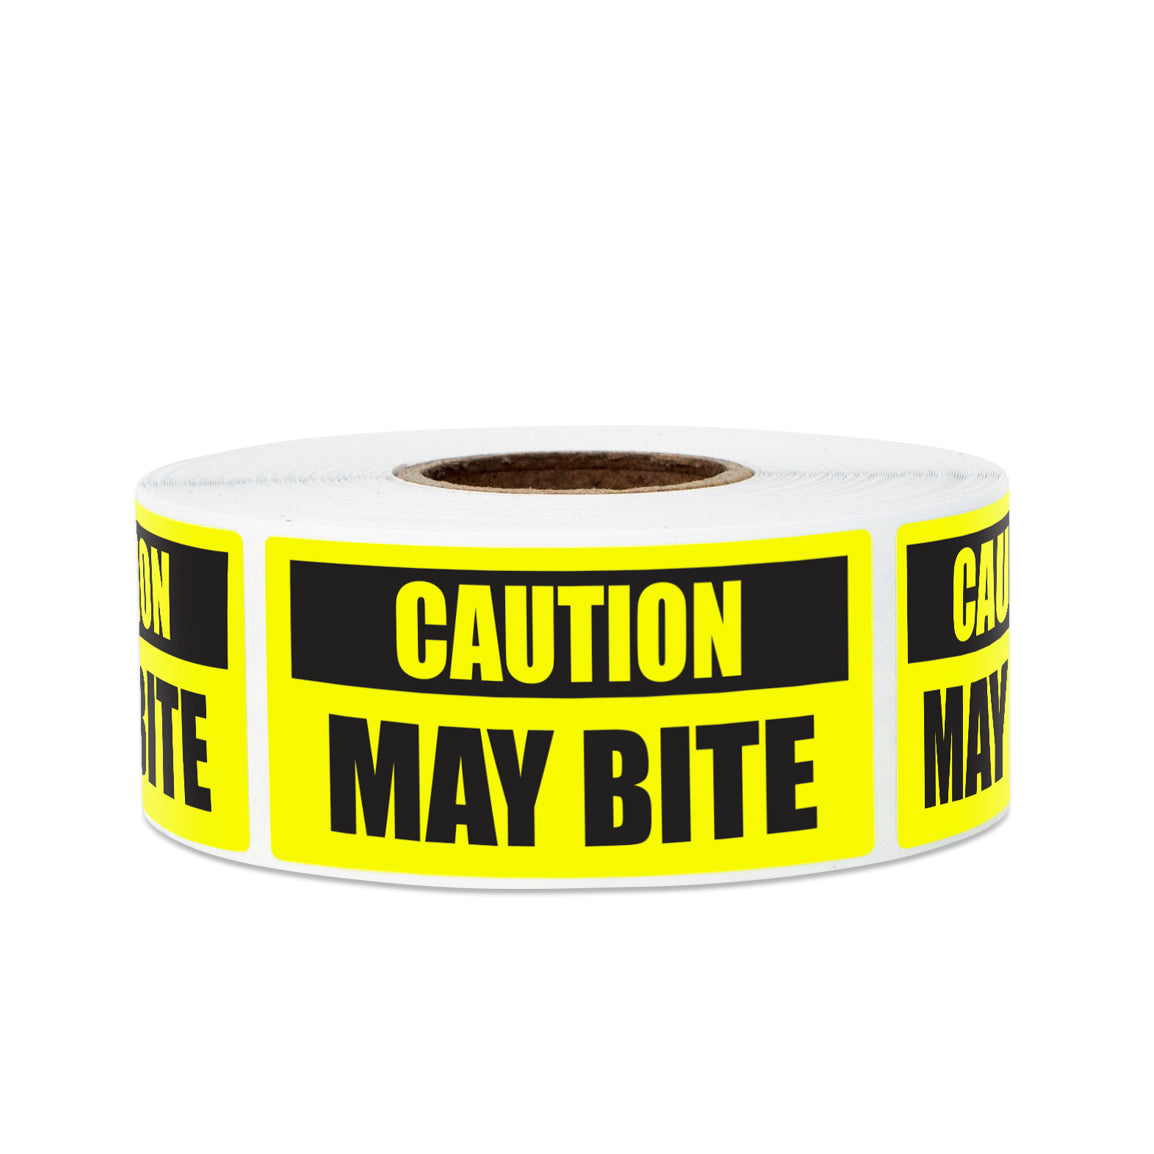 2 x 1 inch | Warning & Caution: Caution May Bite Stickers